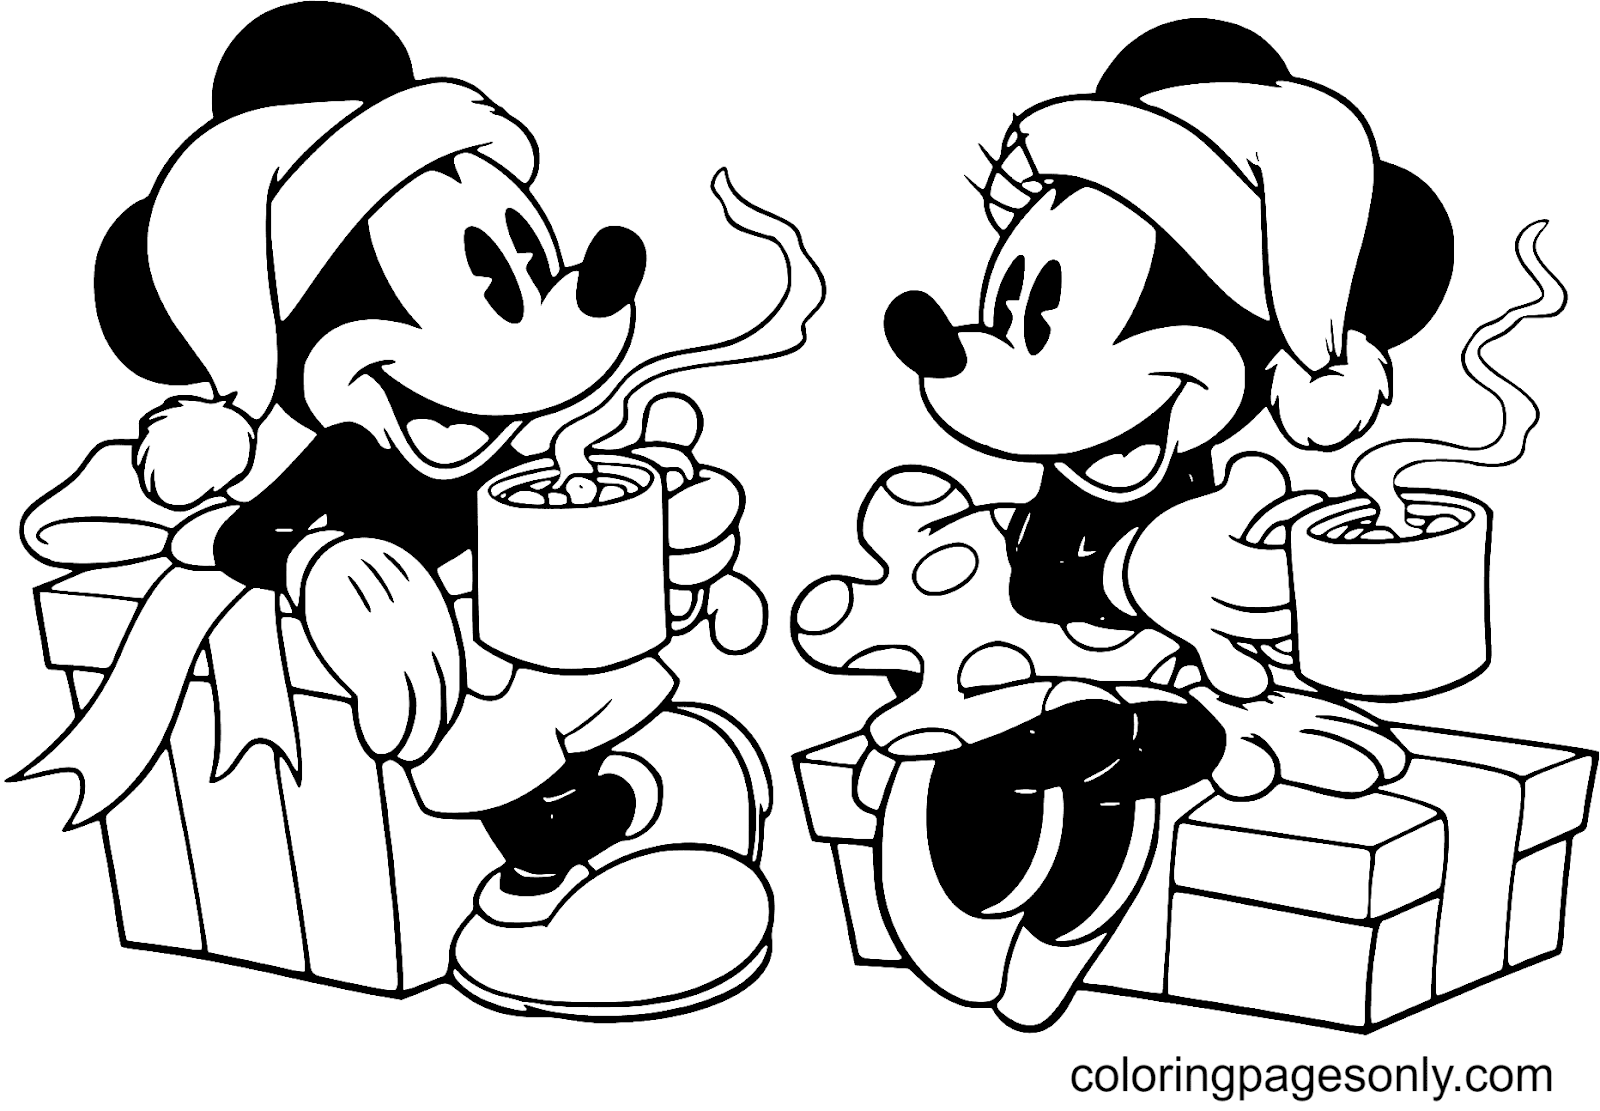 Coloring Pages and Coloring Pages for Kids: Some Pictures Help Your Imagination Come True 2